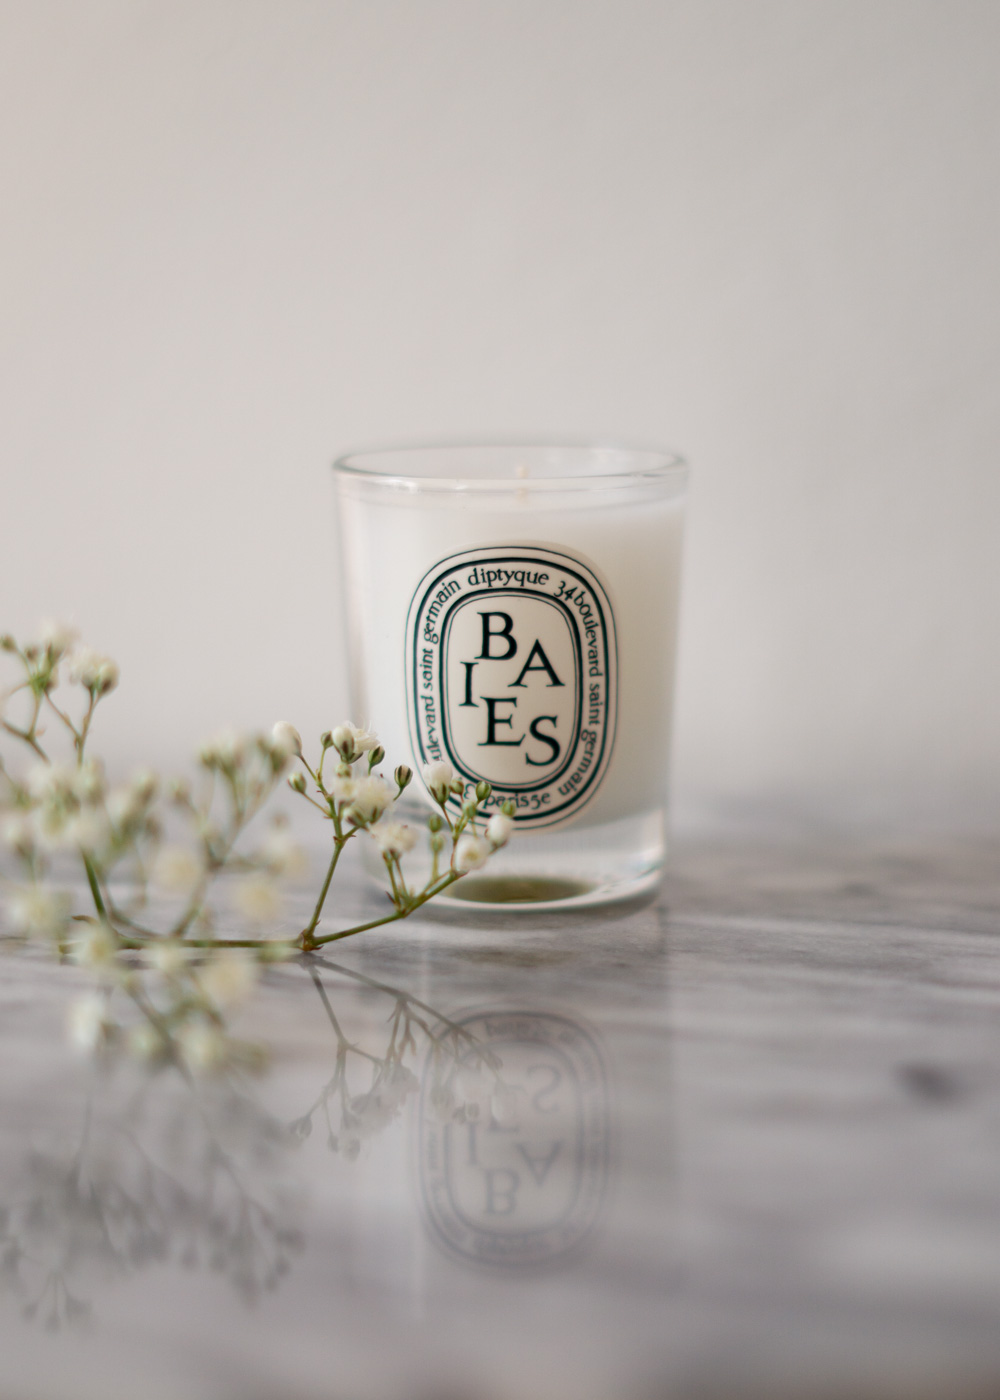 Diptyque Paris Candle Perfume ~ Interior Decor Details, Beauty Fragrance, French Aesthetic, Product Photography, Light Shadows, Shadow Play, Minimalist Style, Home, Styling - RG Daily Blog